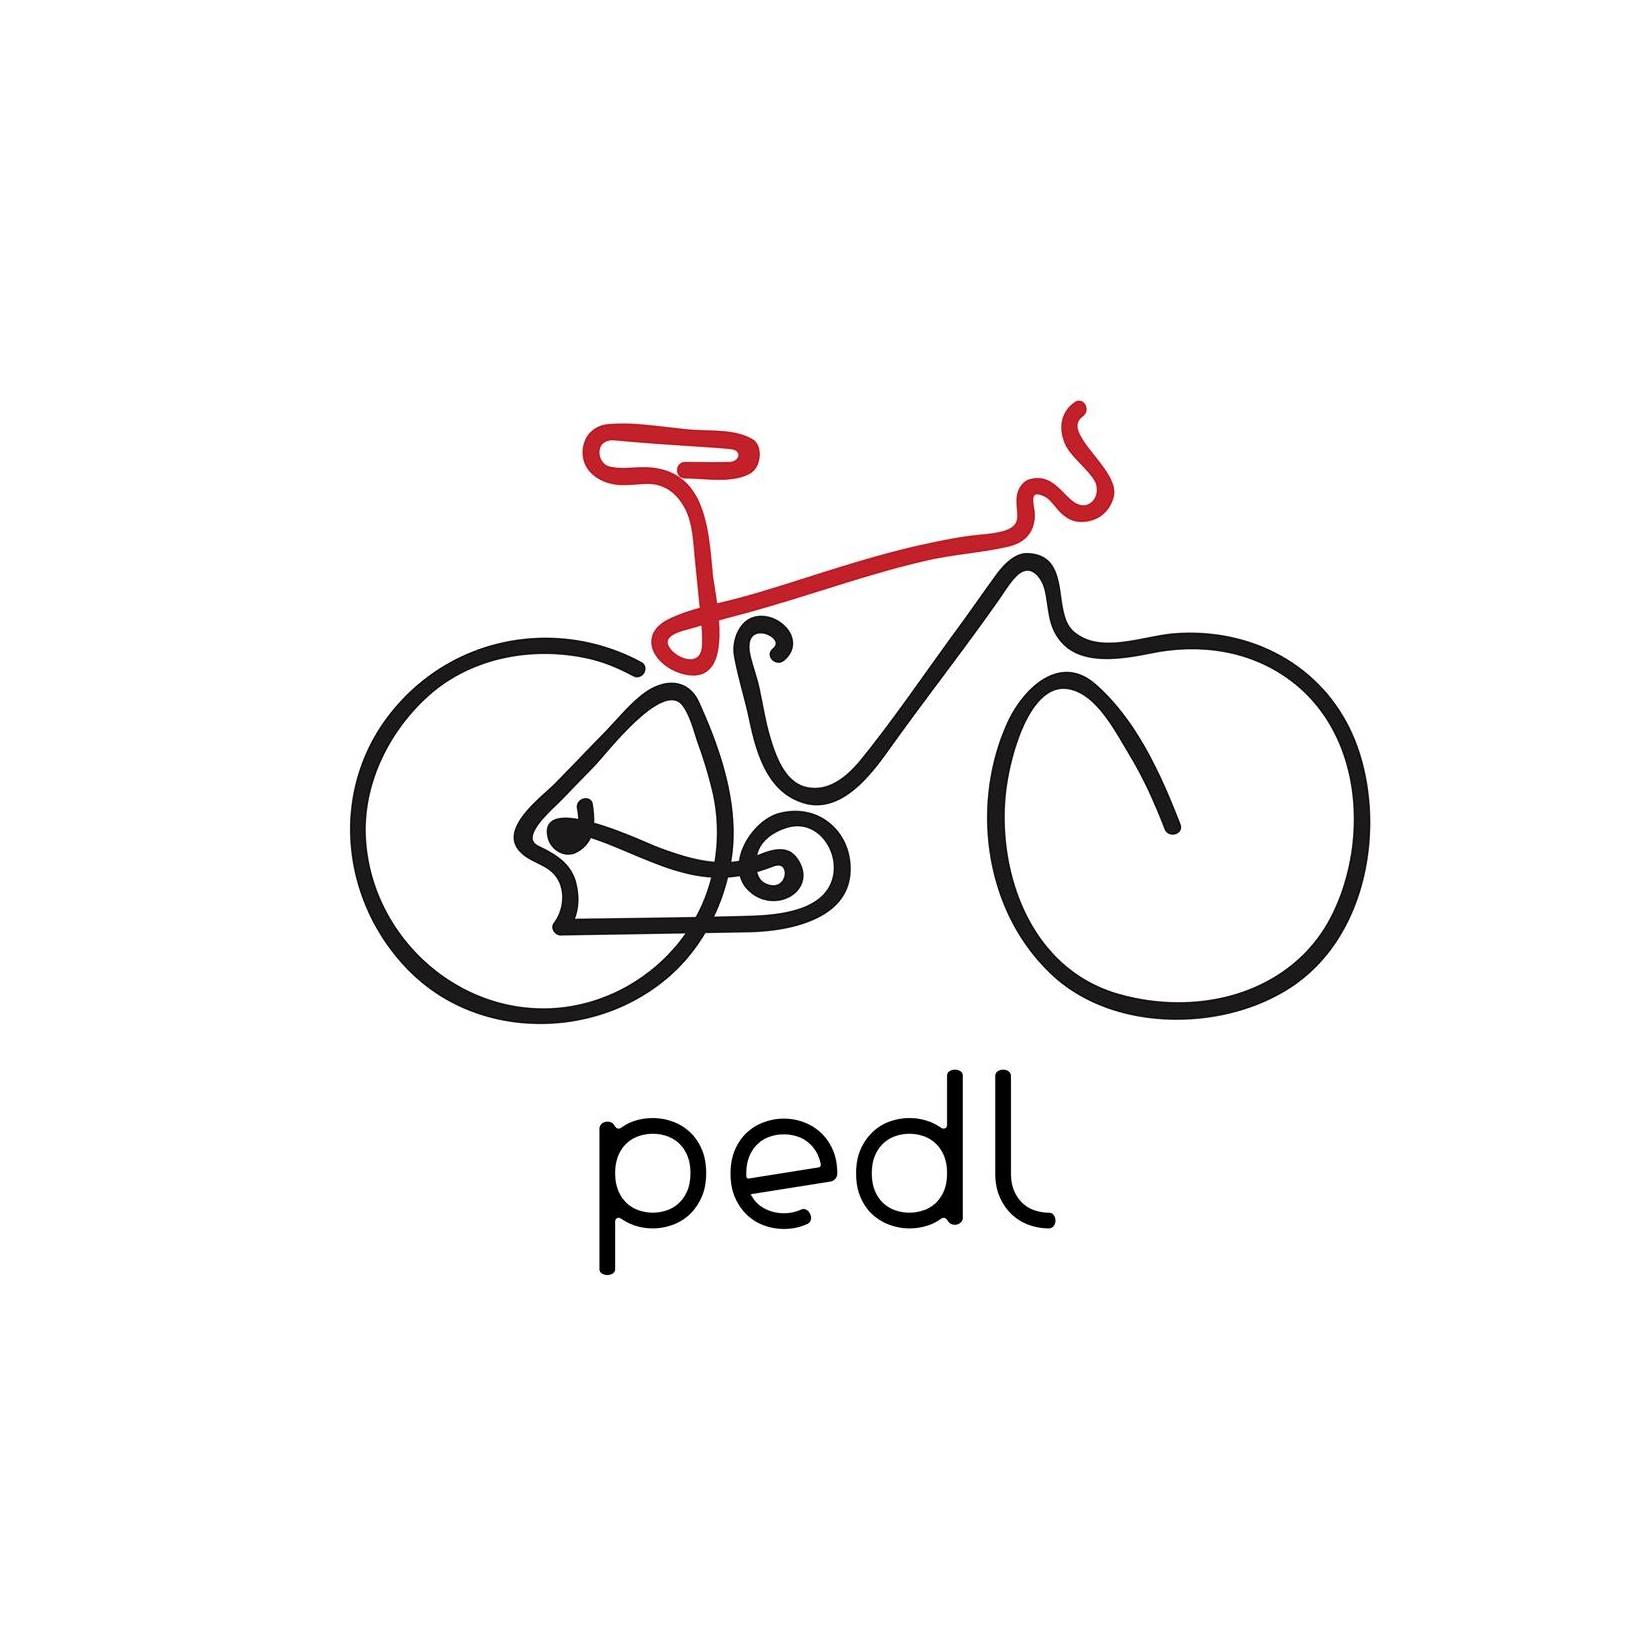 PedL - Electric Bikes & Electric Scooters - Buy, Repair, Rent Sydney